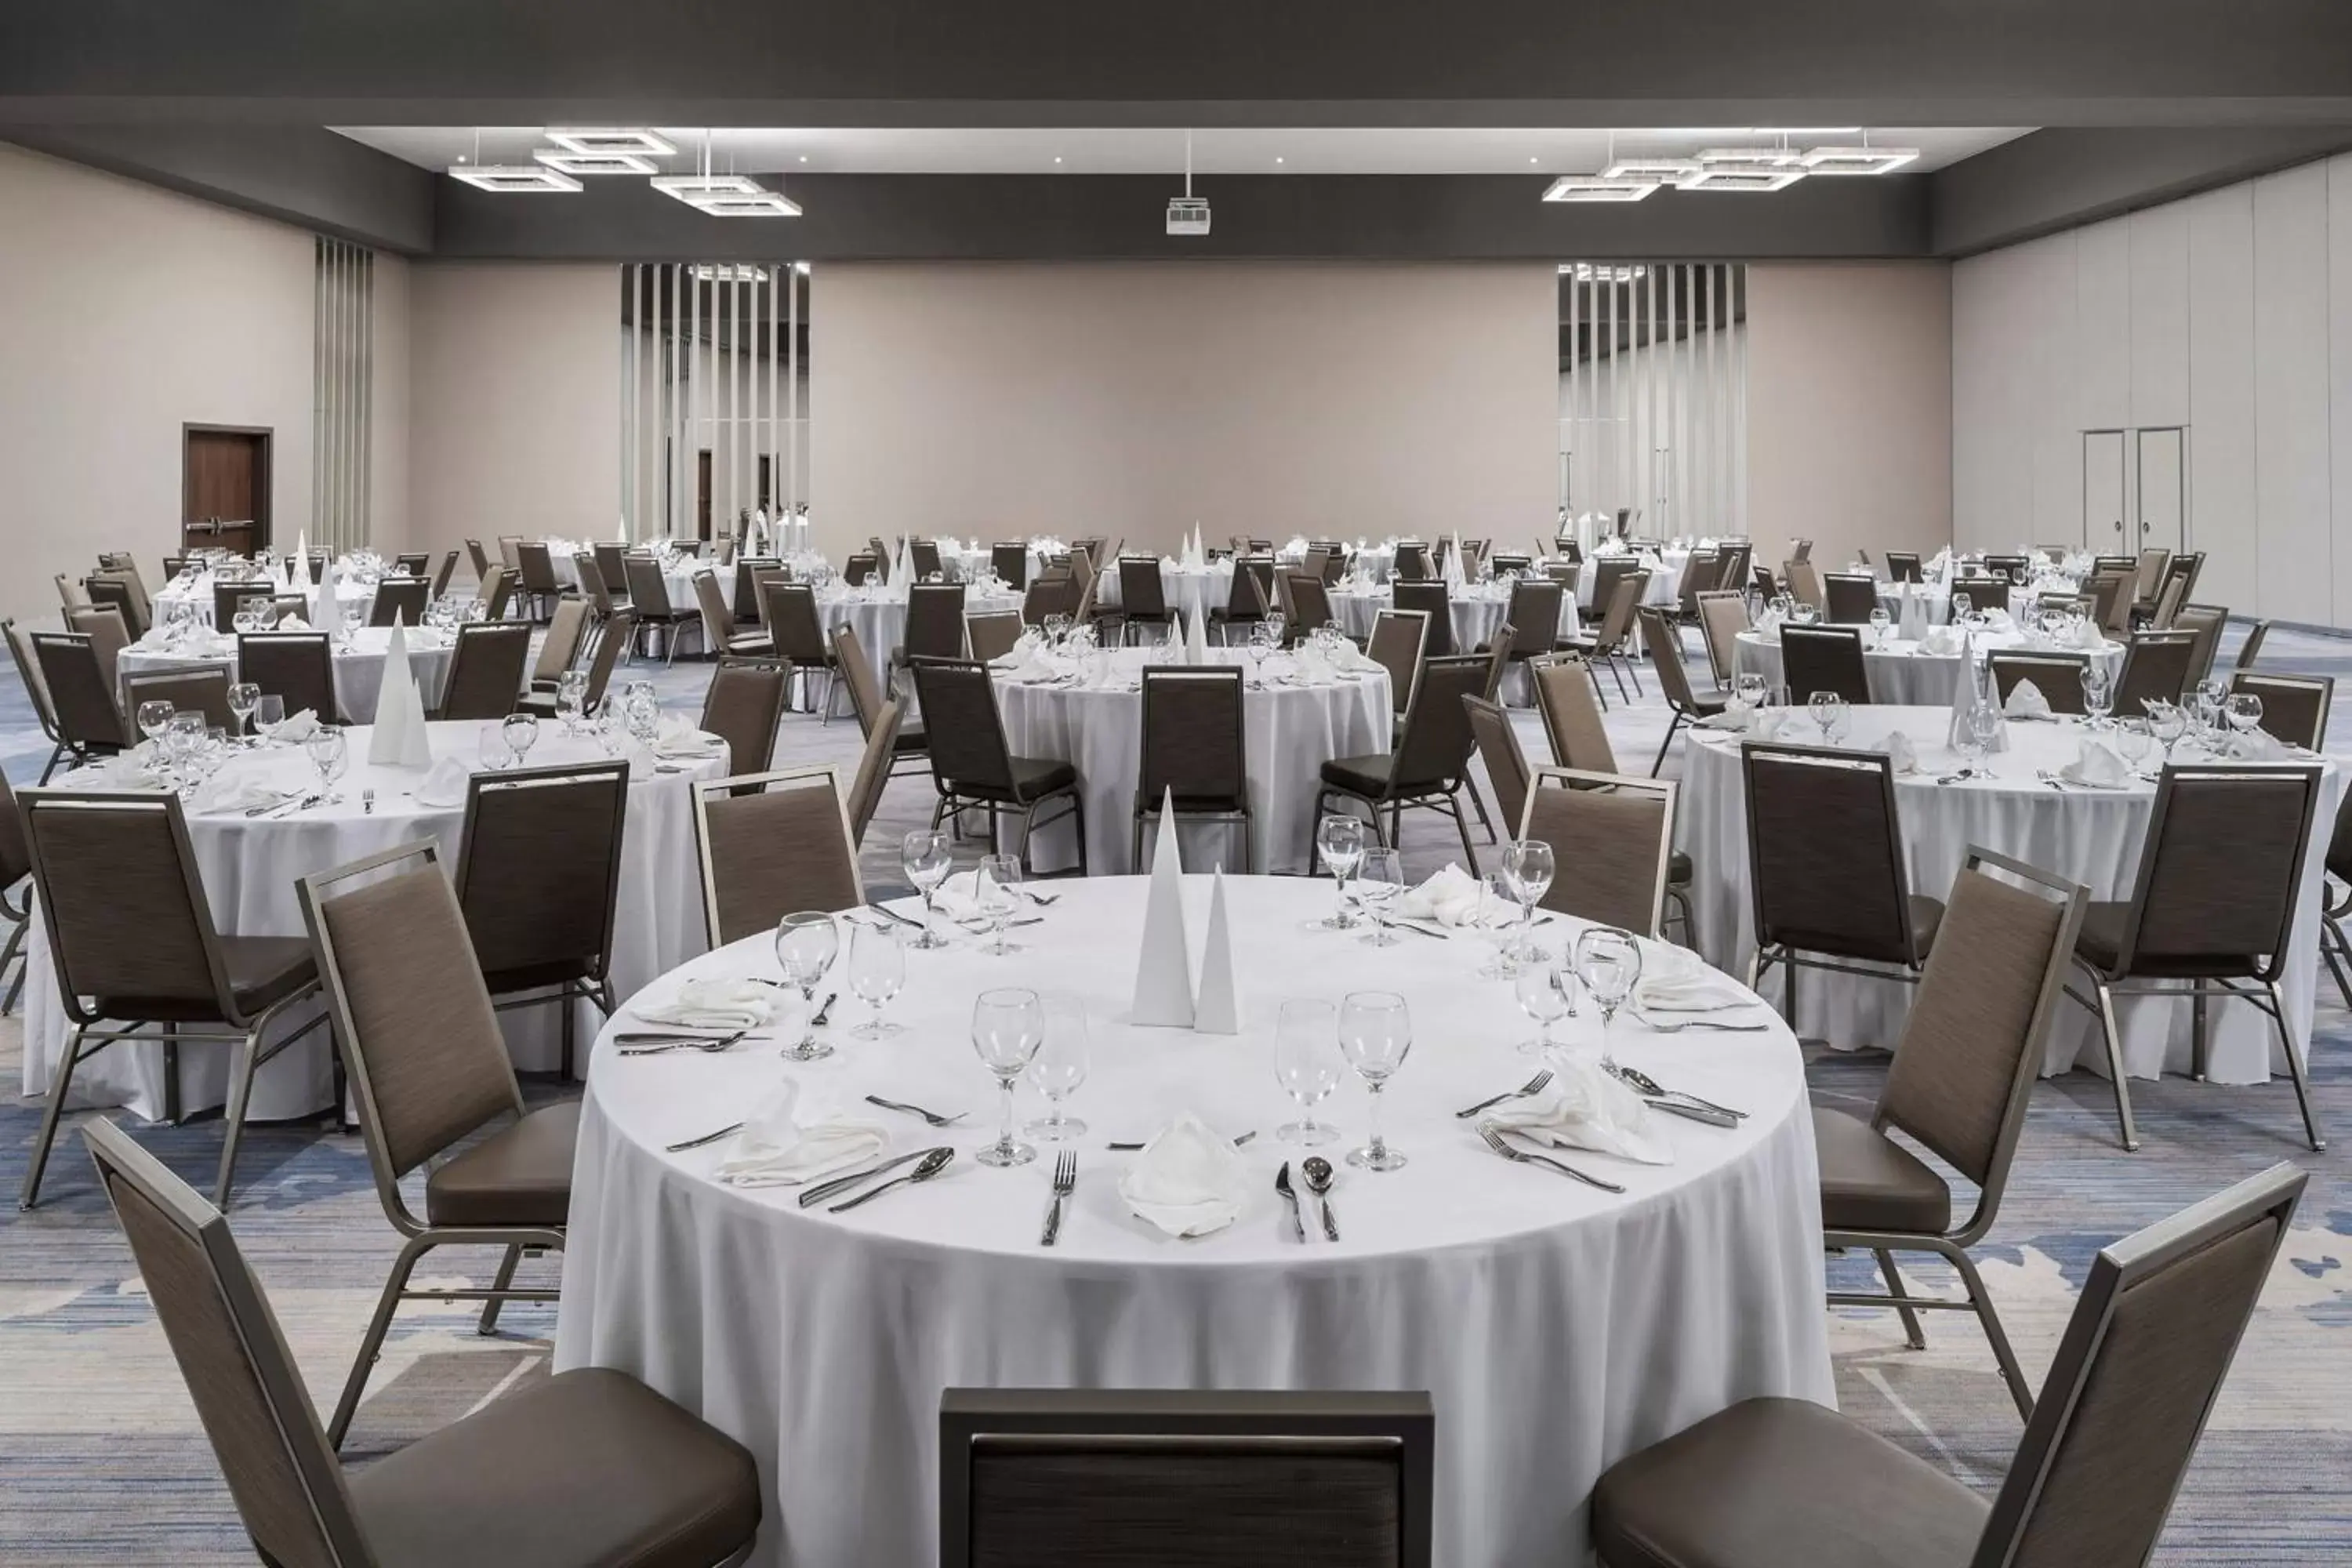 Meeting/conference room, Banquet Facilities in AC Hotel by Marriott Kingston, Jamaica